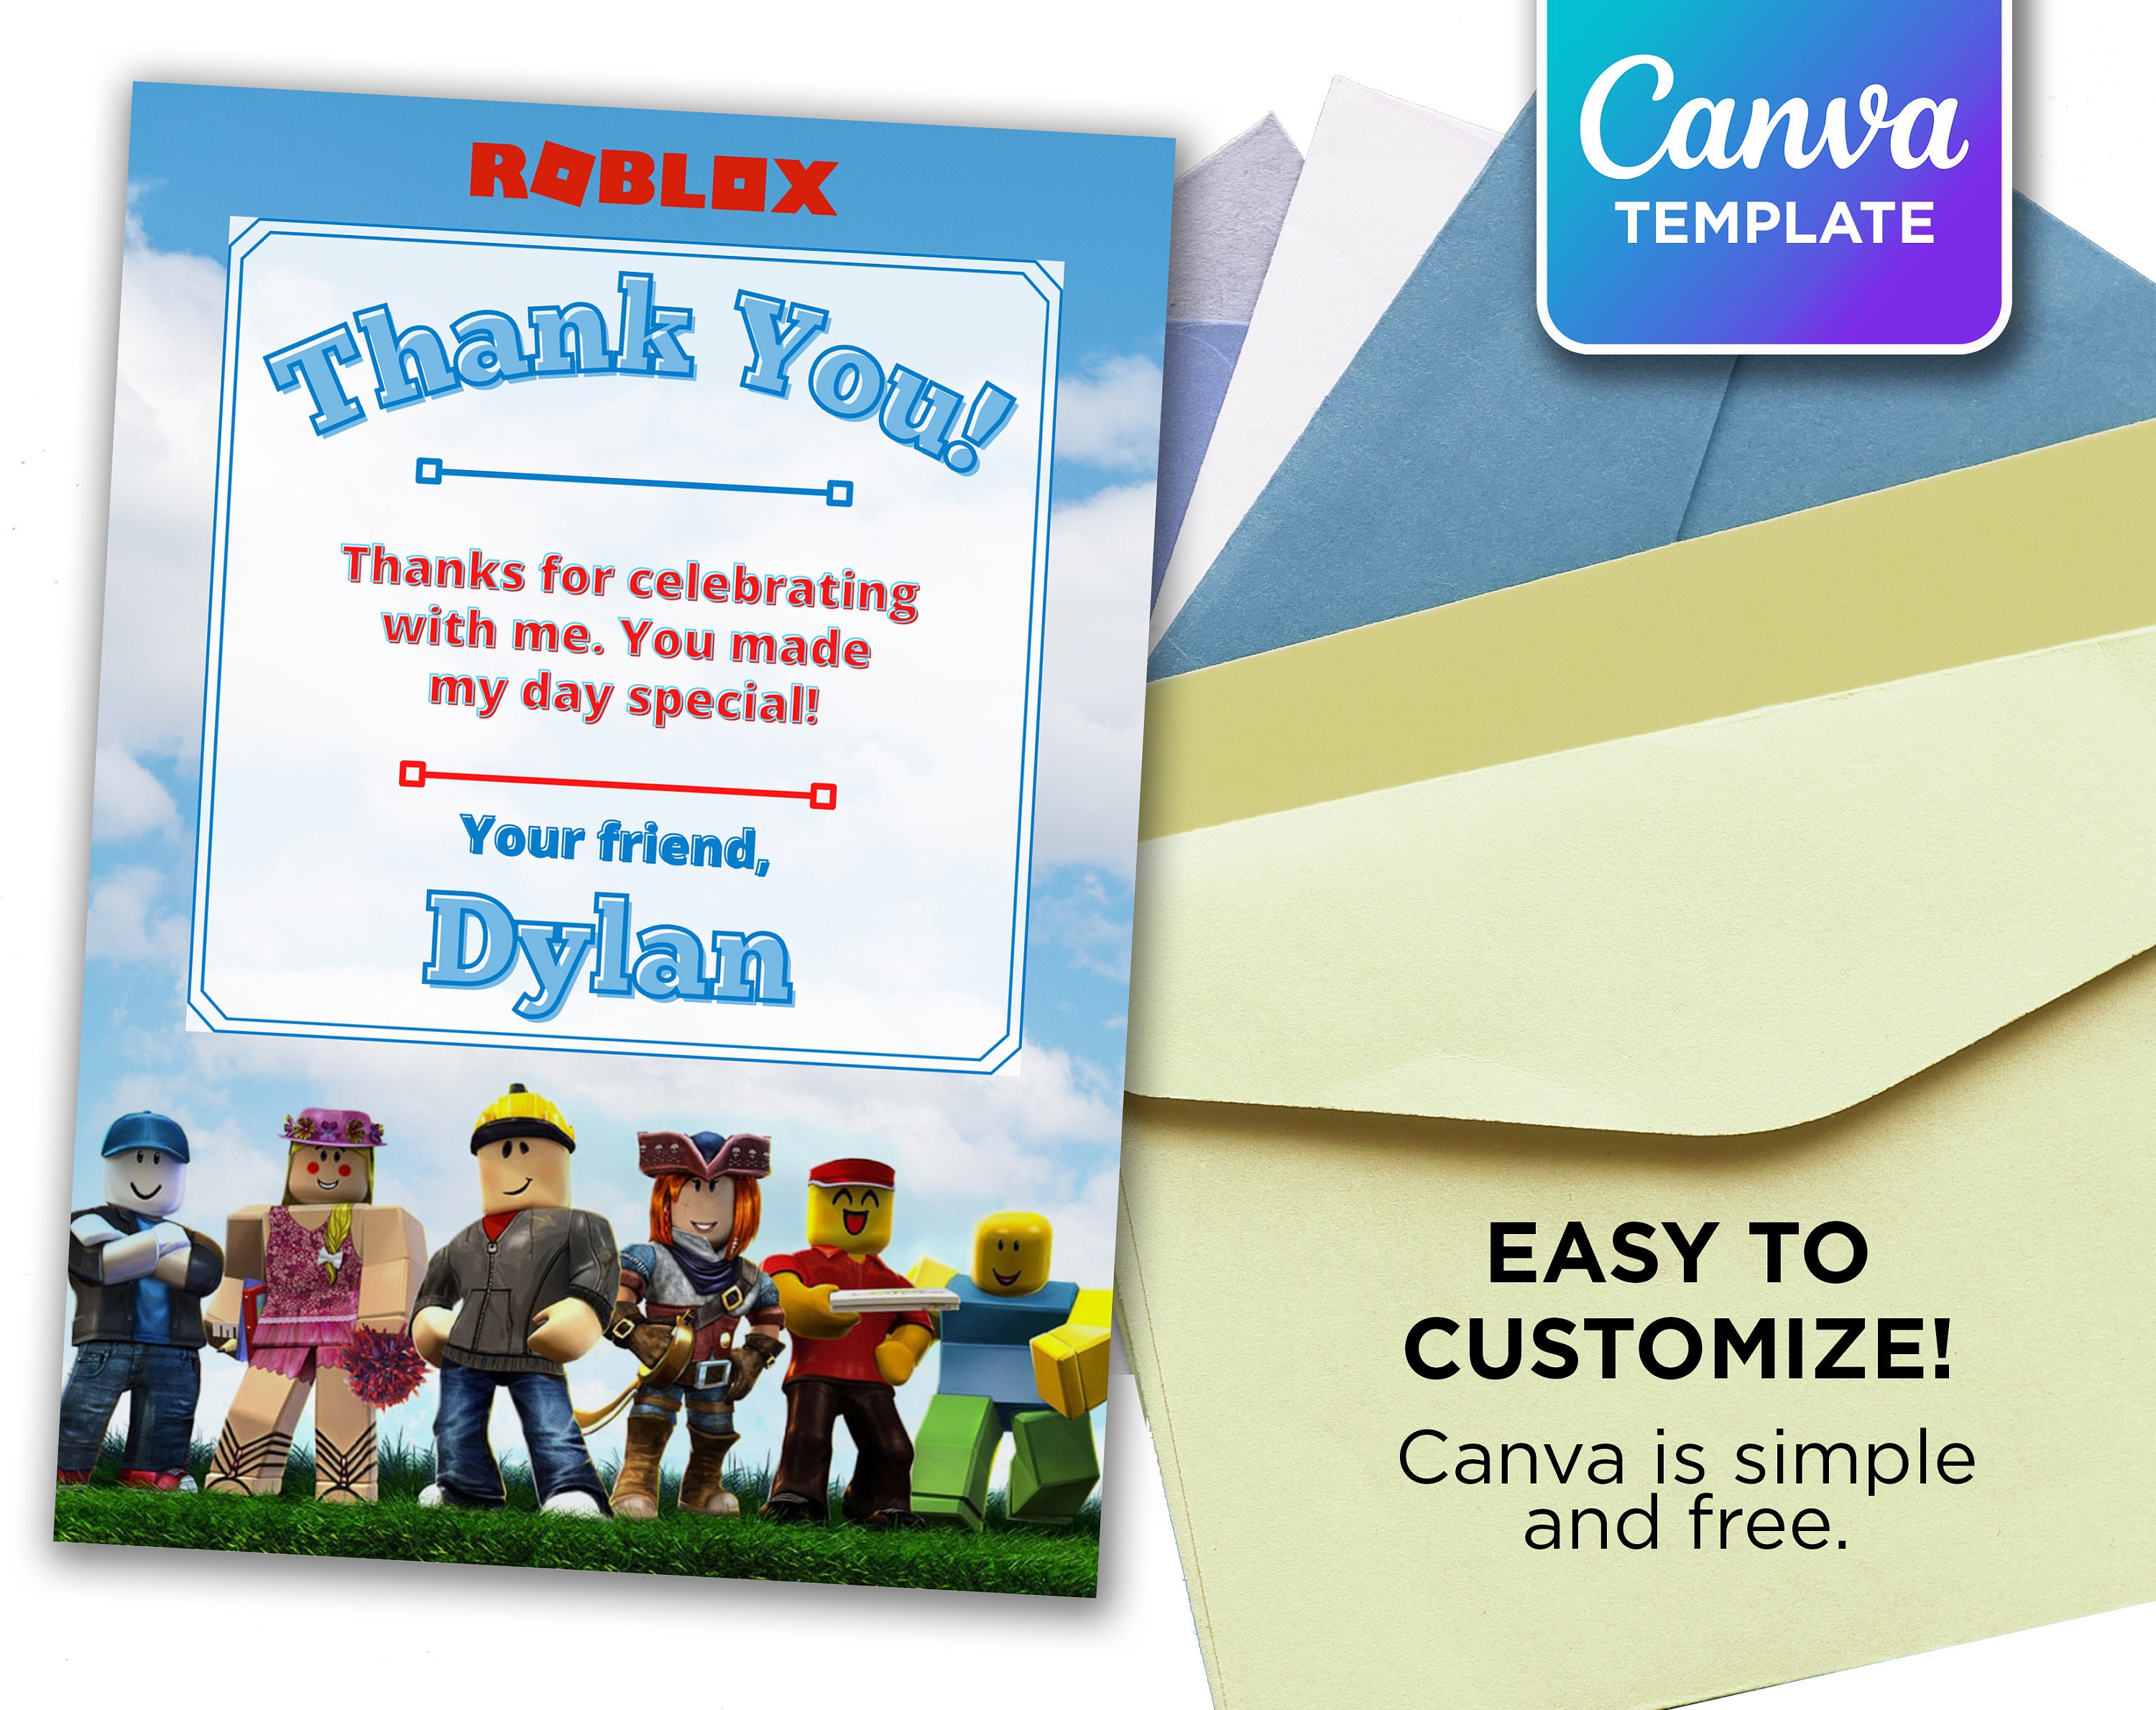 Robux Gift Card Holder Printable for Birthdays Roblox -  Finland